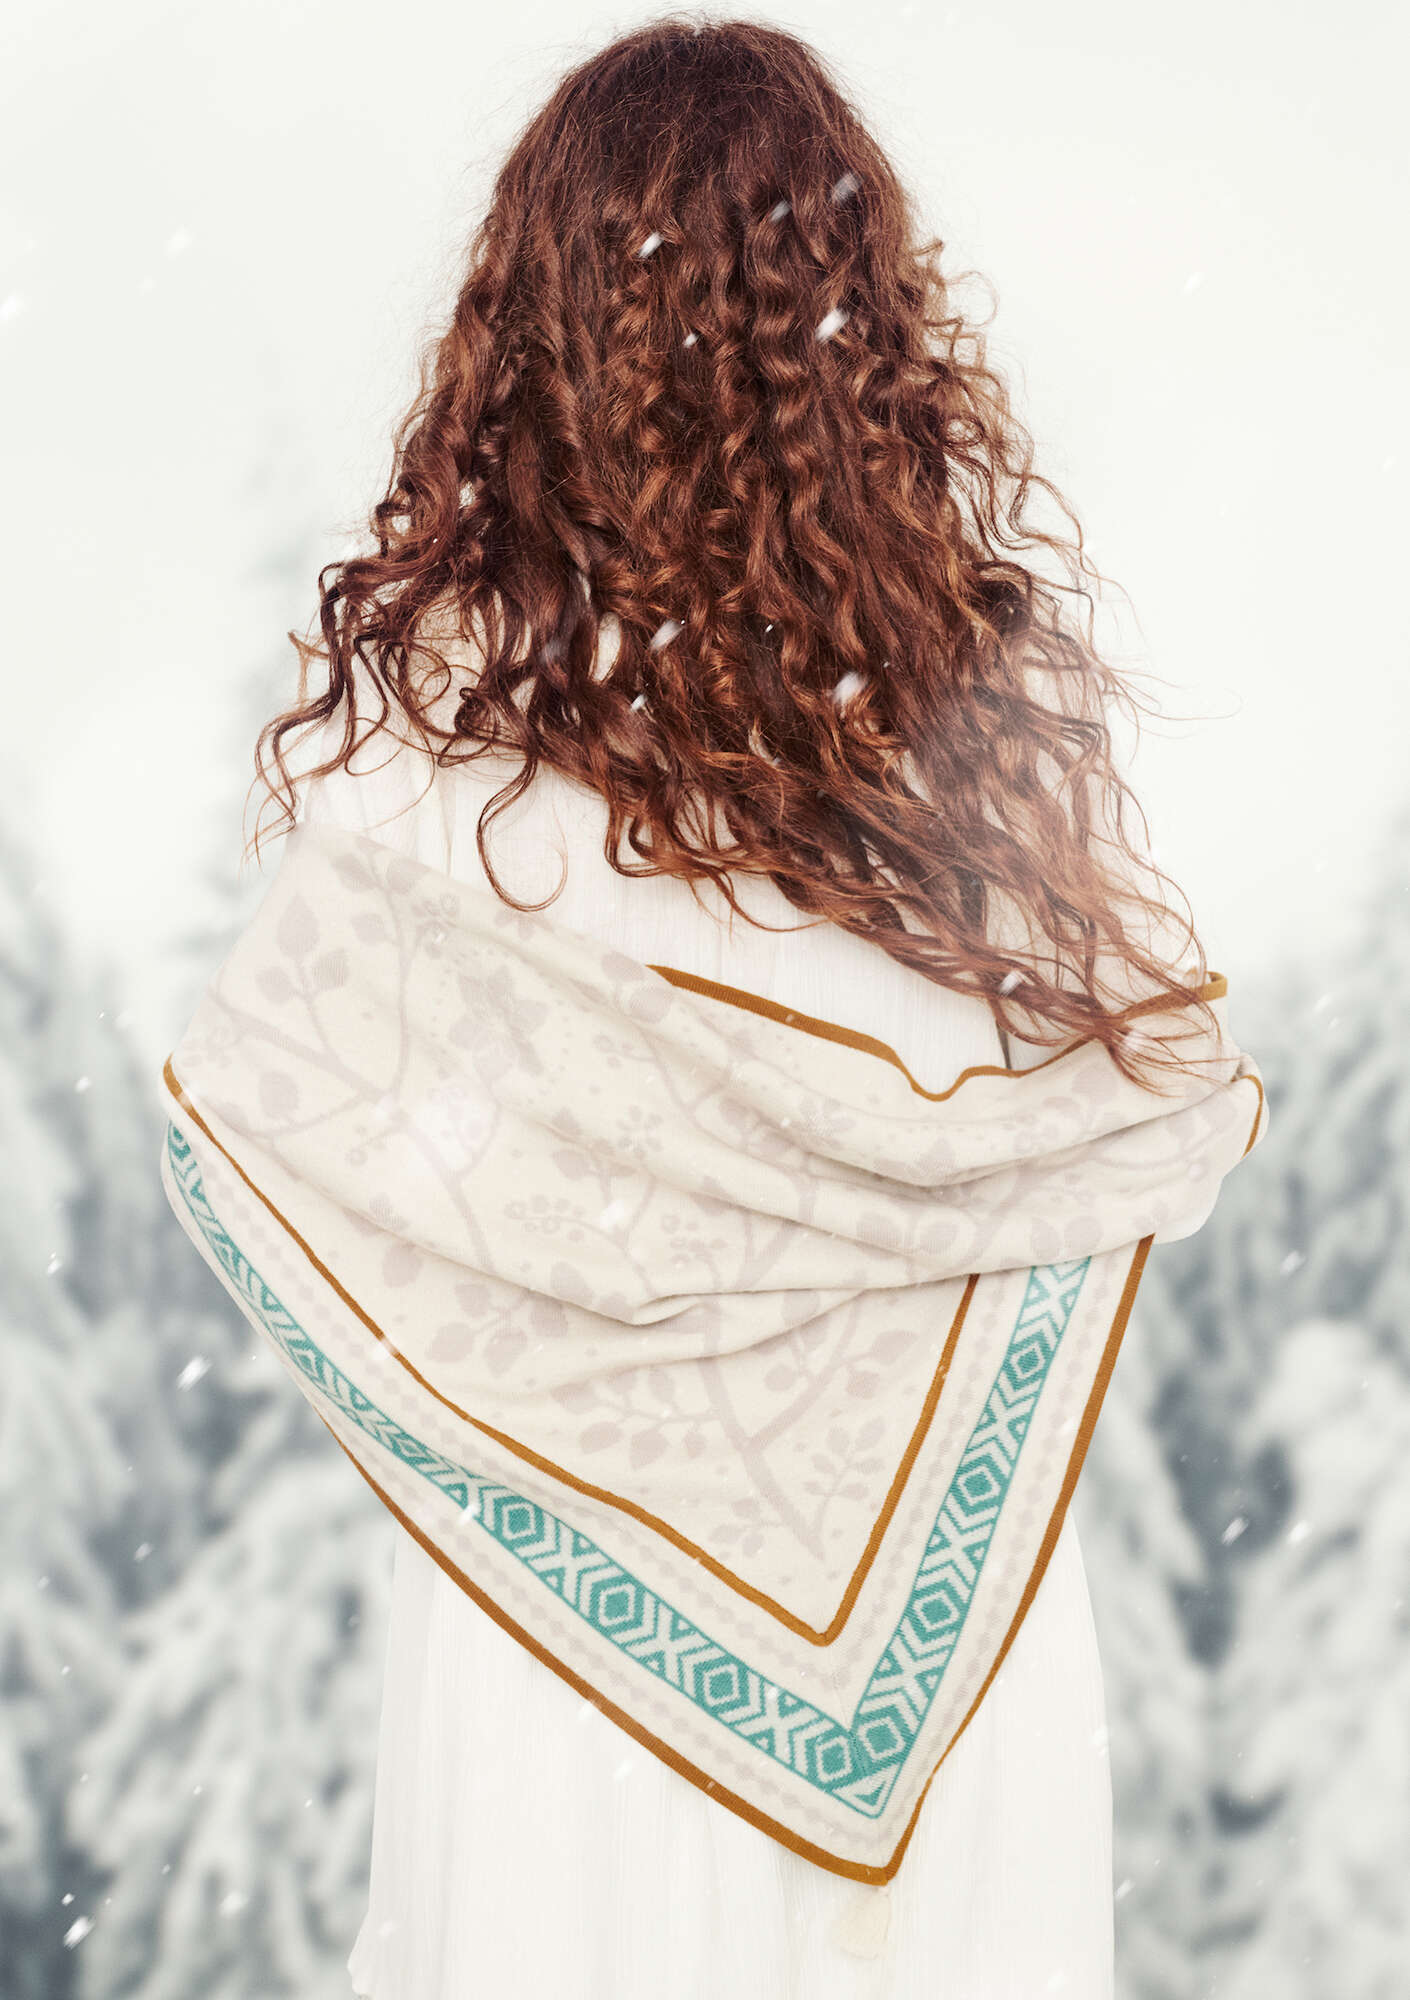 “Rimfrost” knit shawl in wool/organic and recycled cotton almond milk